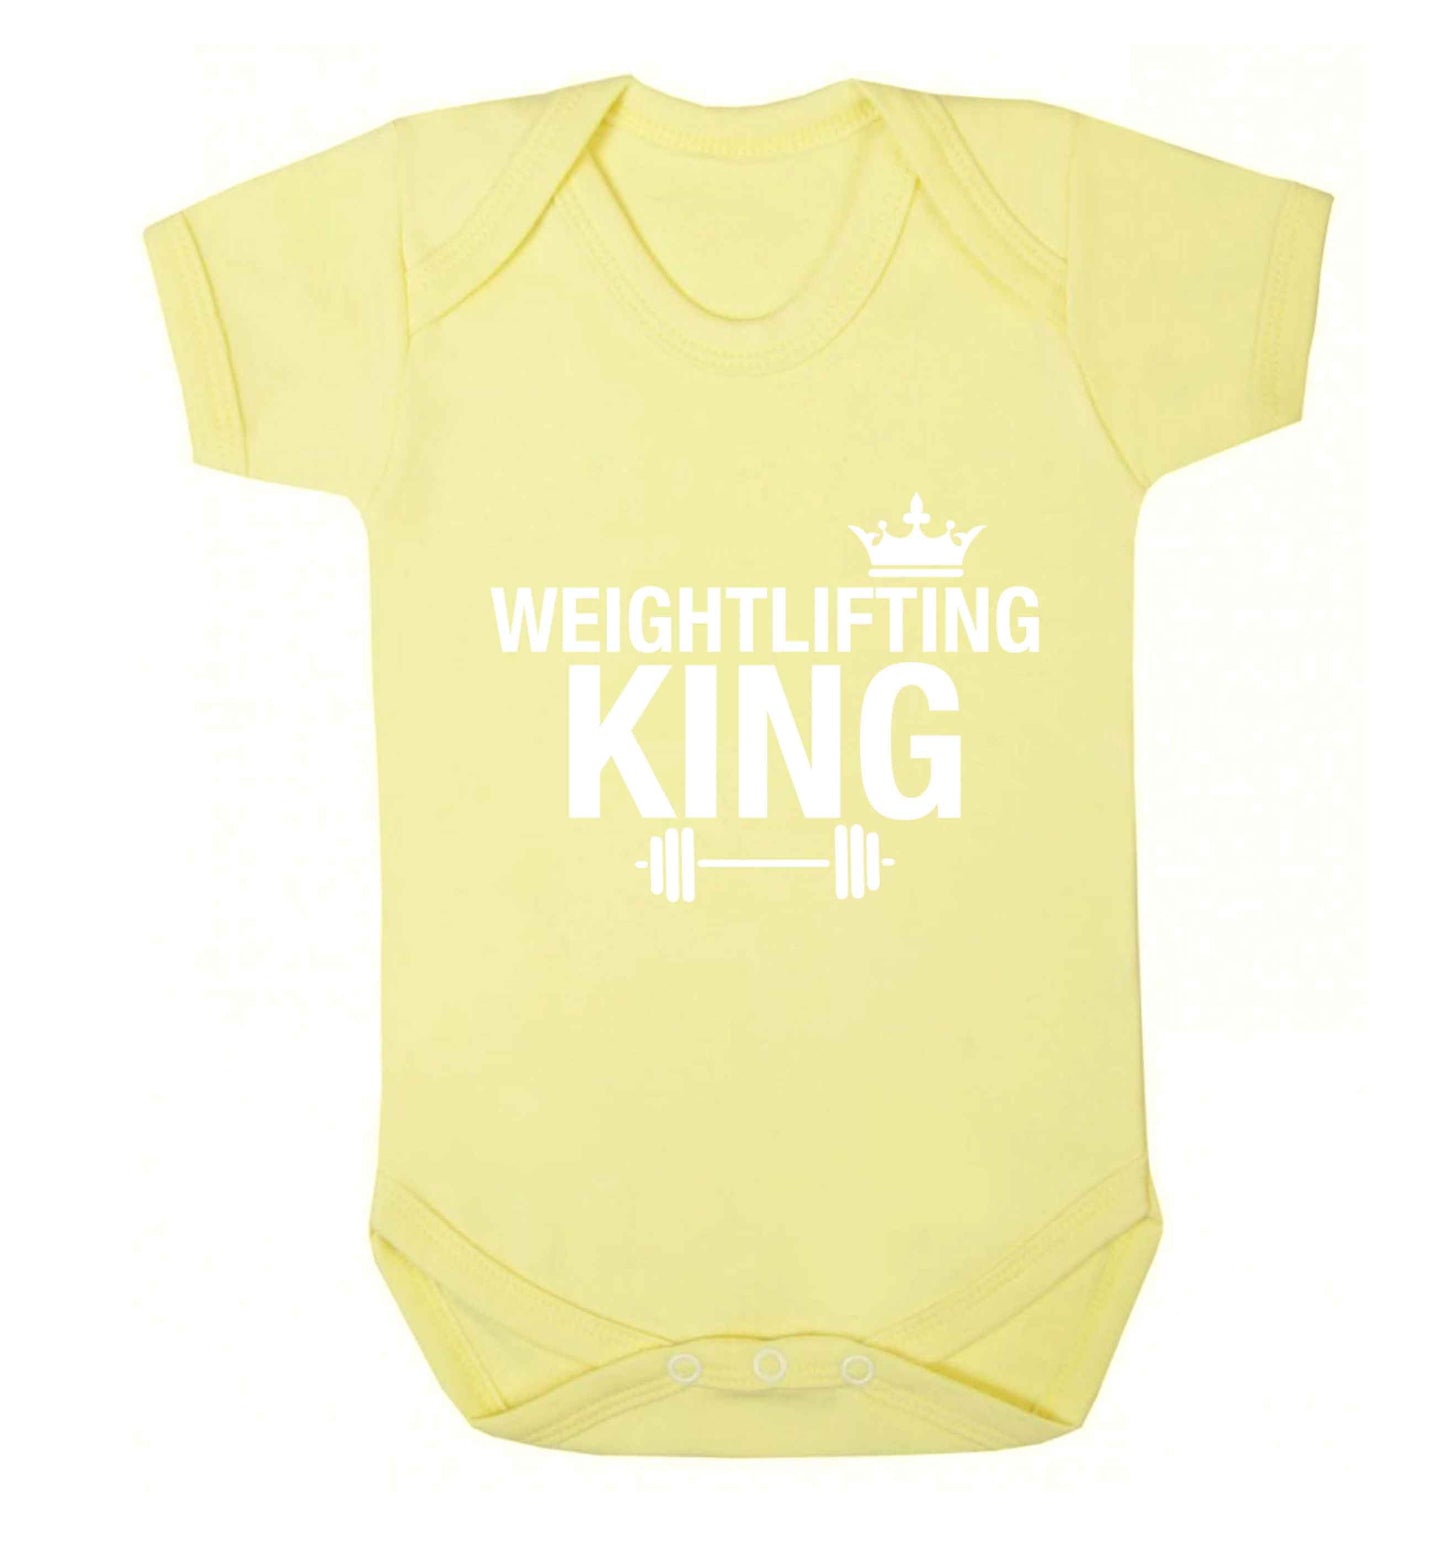 Weightlifting king Baby Vest pale yellow 18-24 months